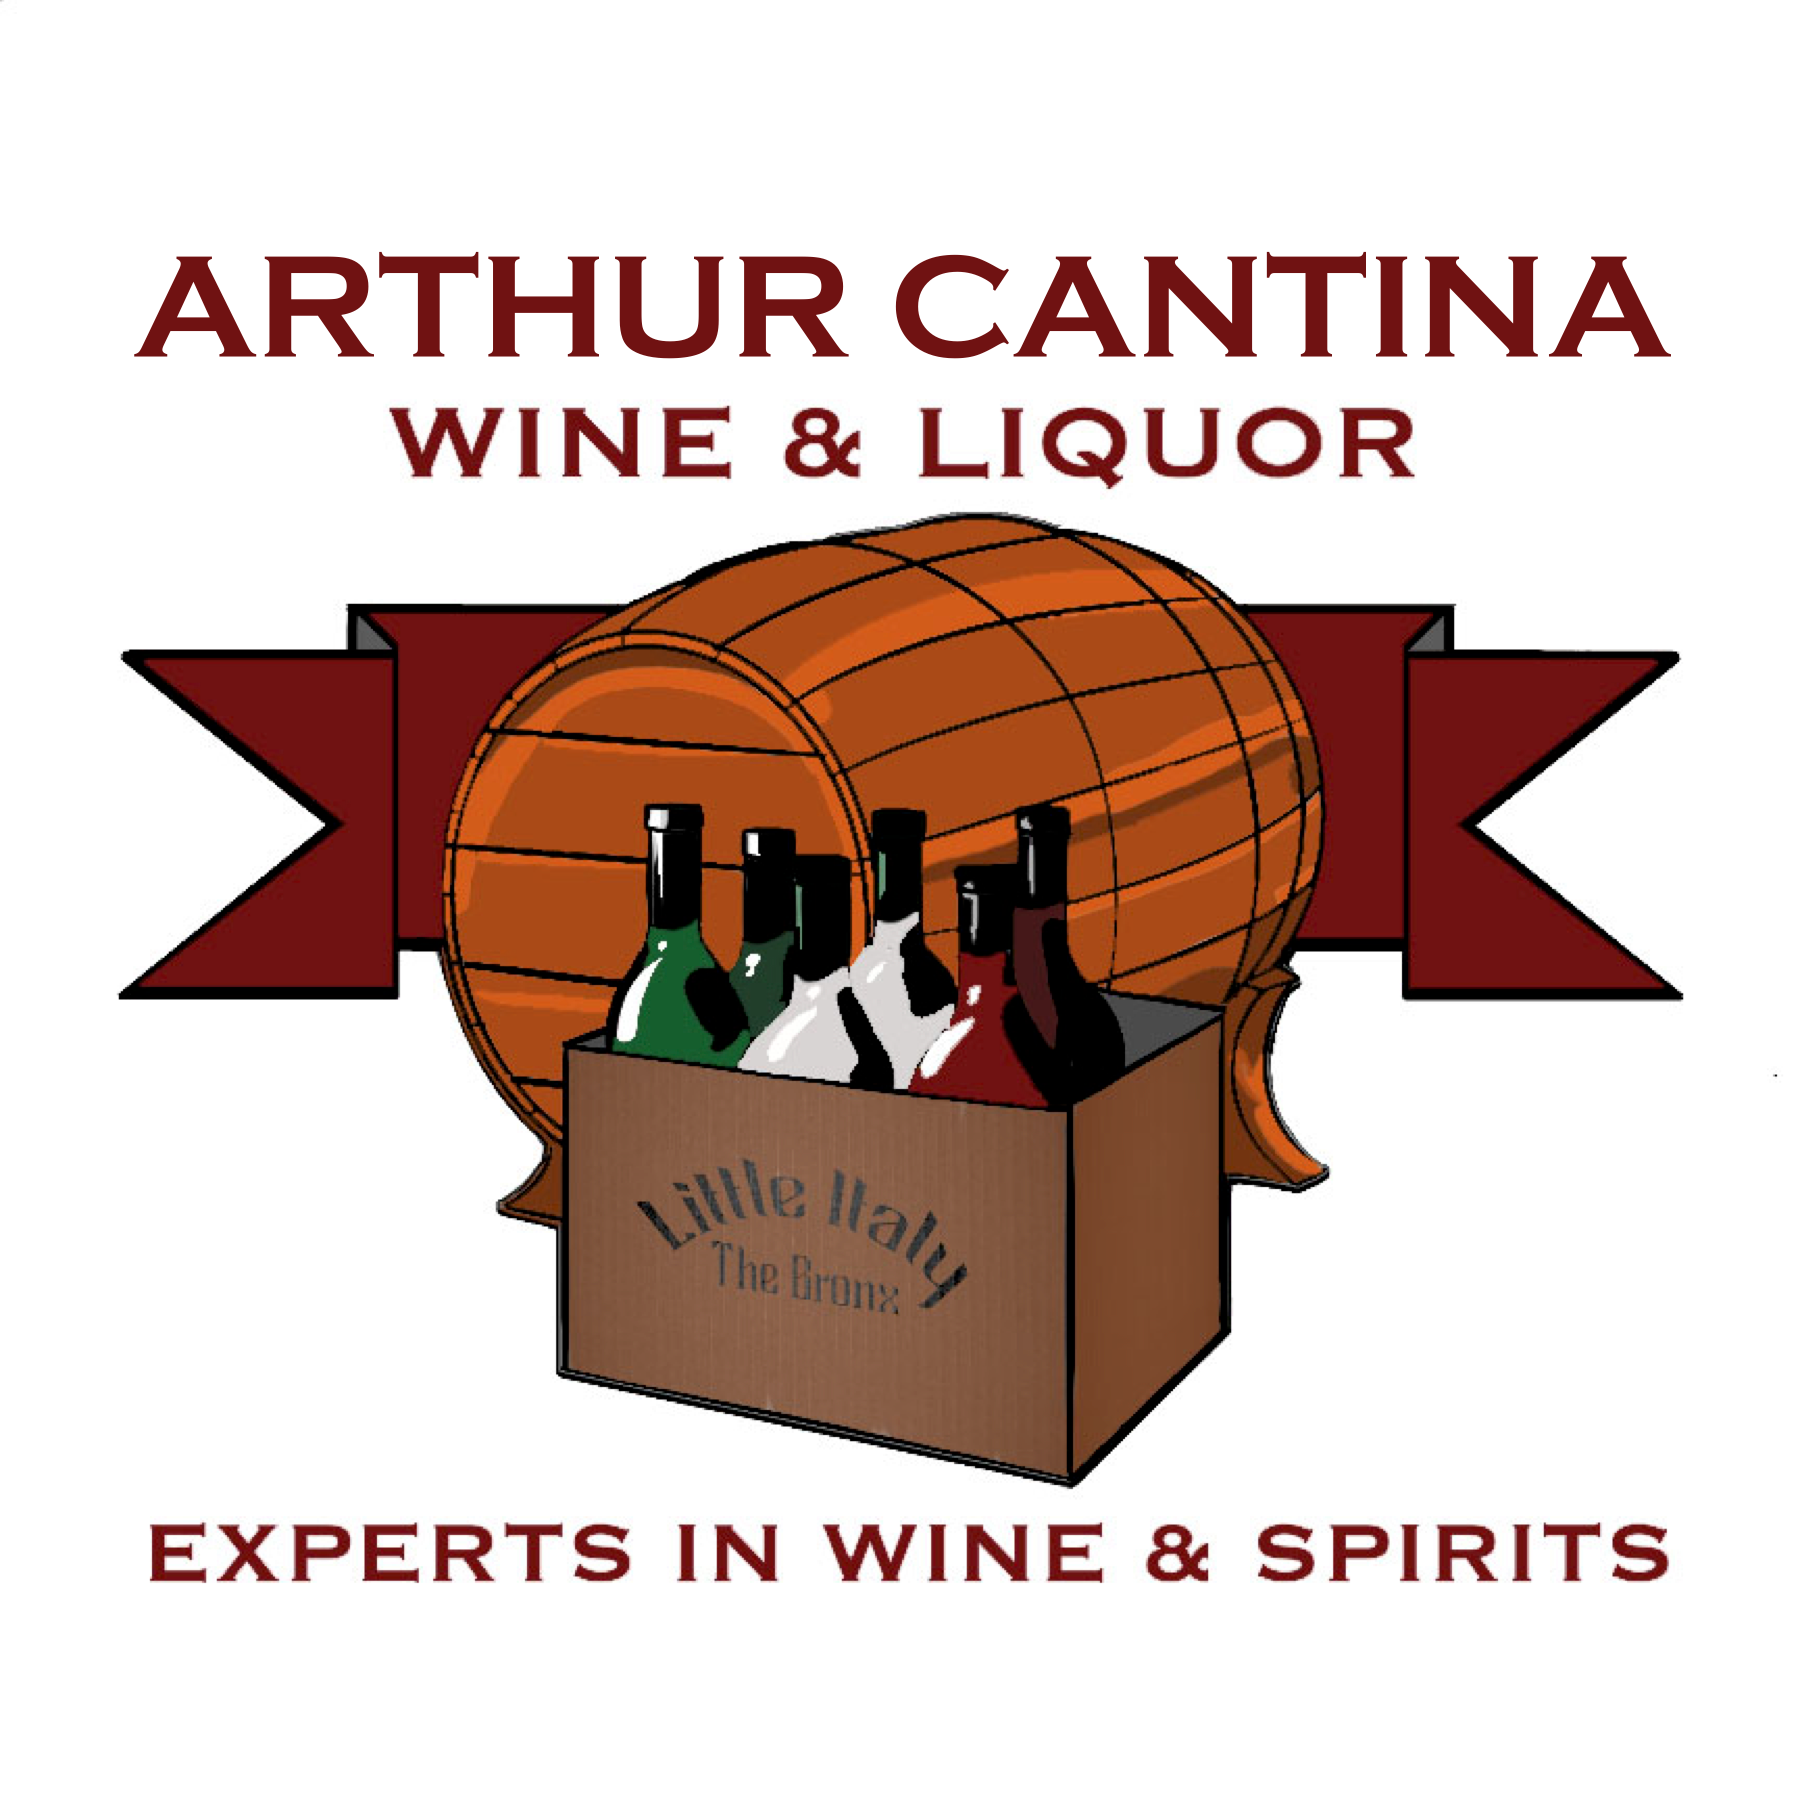 the is a plastic gift card much similar to a credit card with the arthur cantina logo, a wine barrel behind a box with assorted bottles of wine all in front of a maroon banner 